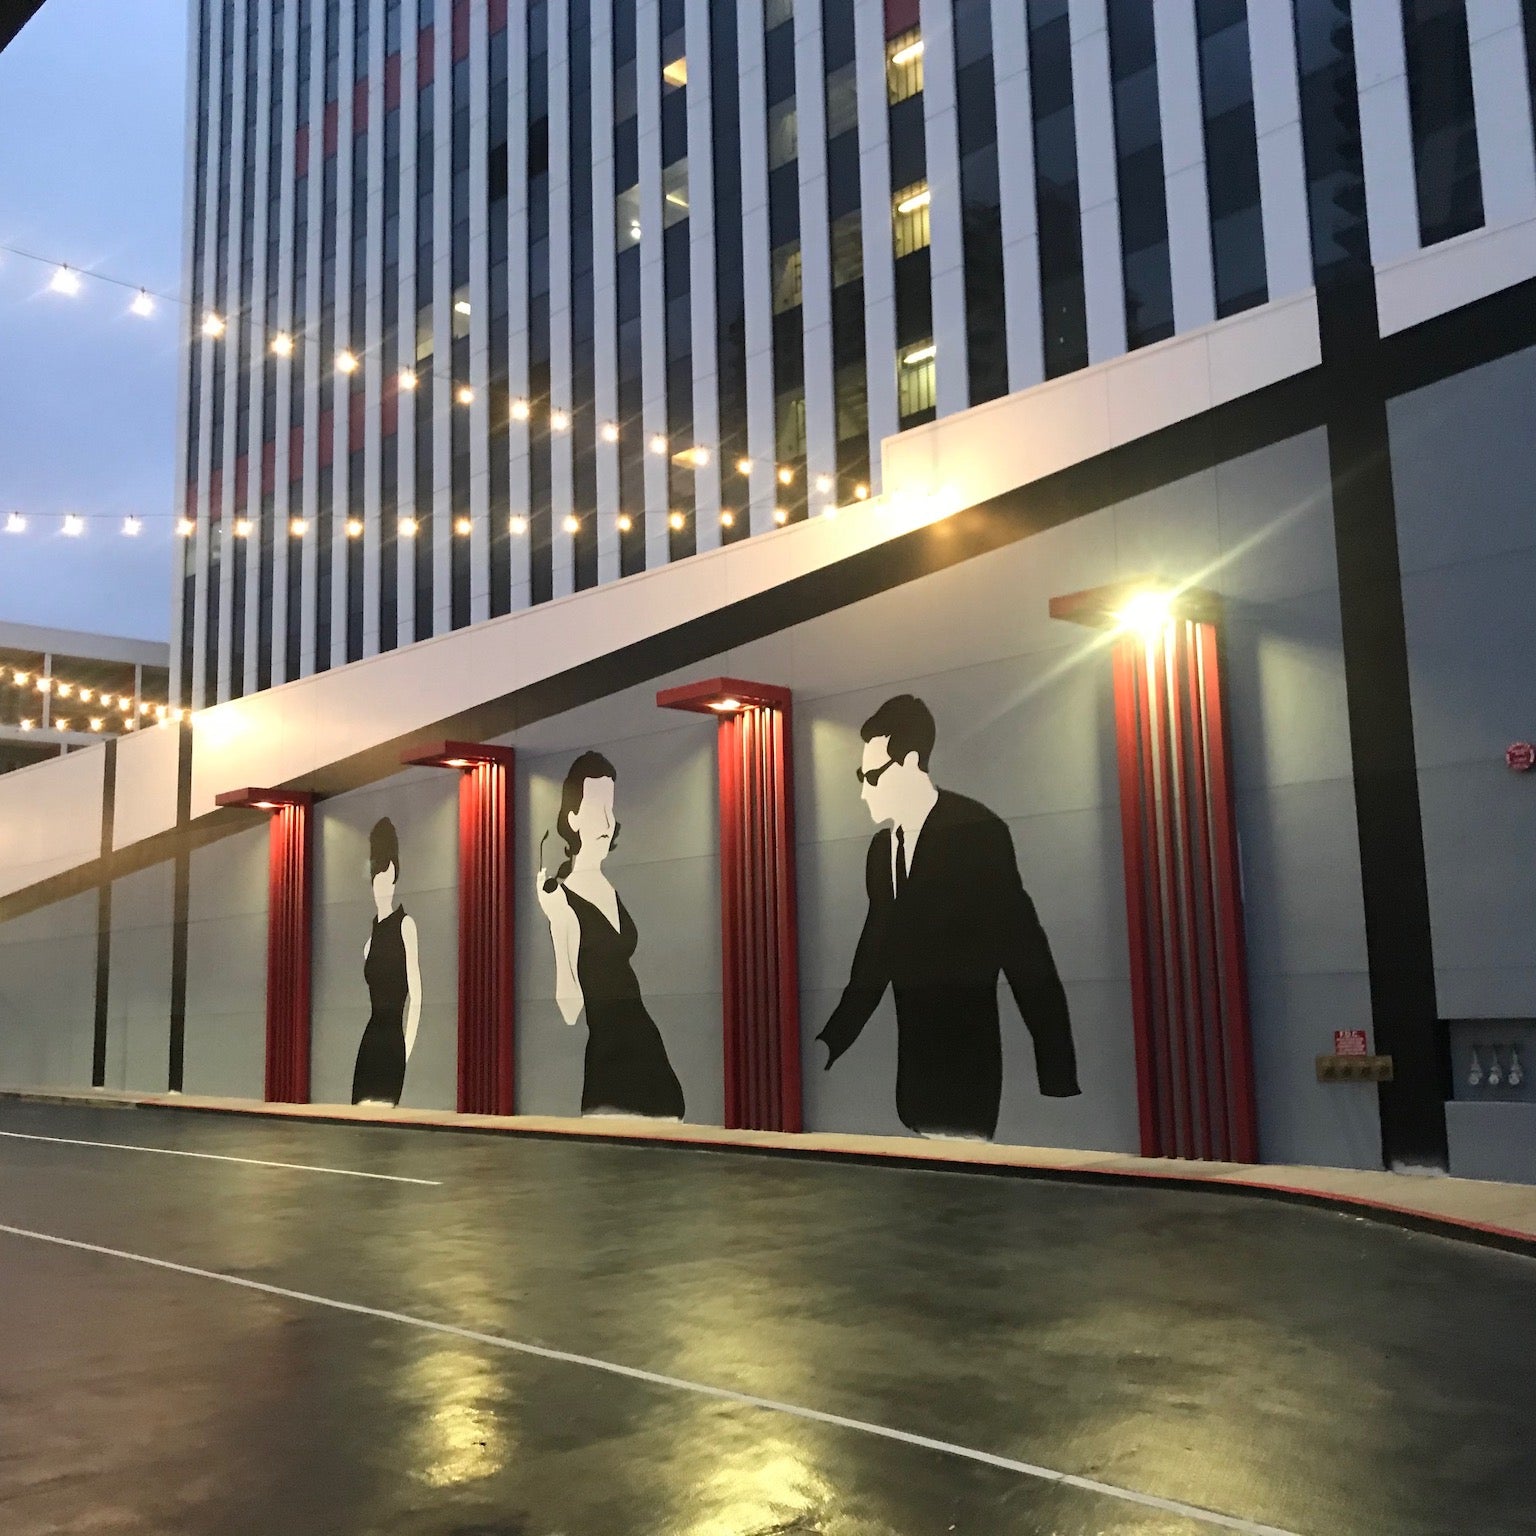 A 100-foot wide hand-painted mural by WRAPPED Studio on the exterior wall of a mid-century modern building, featuring stylized silhouettes of a man and a woman that serve as a local landmark in Long Beach.